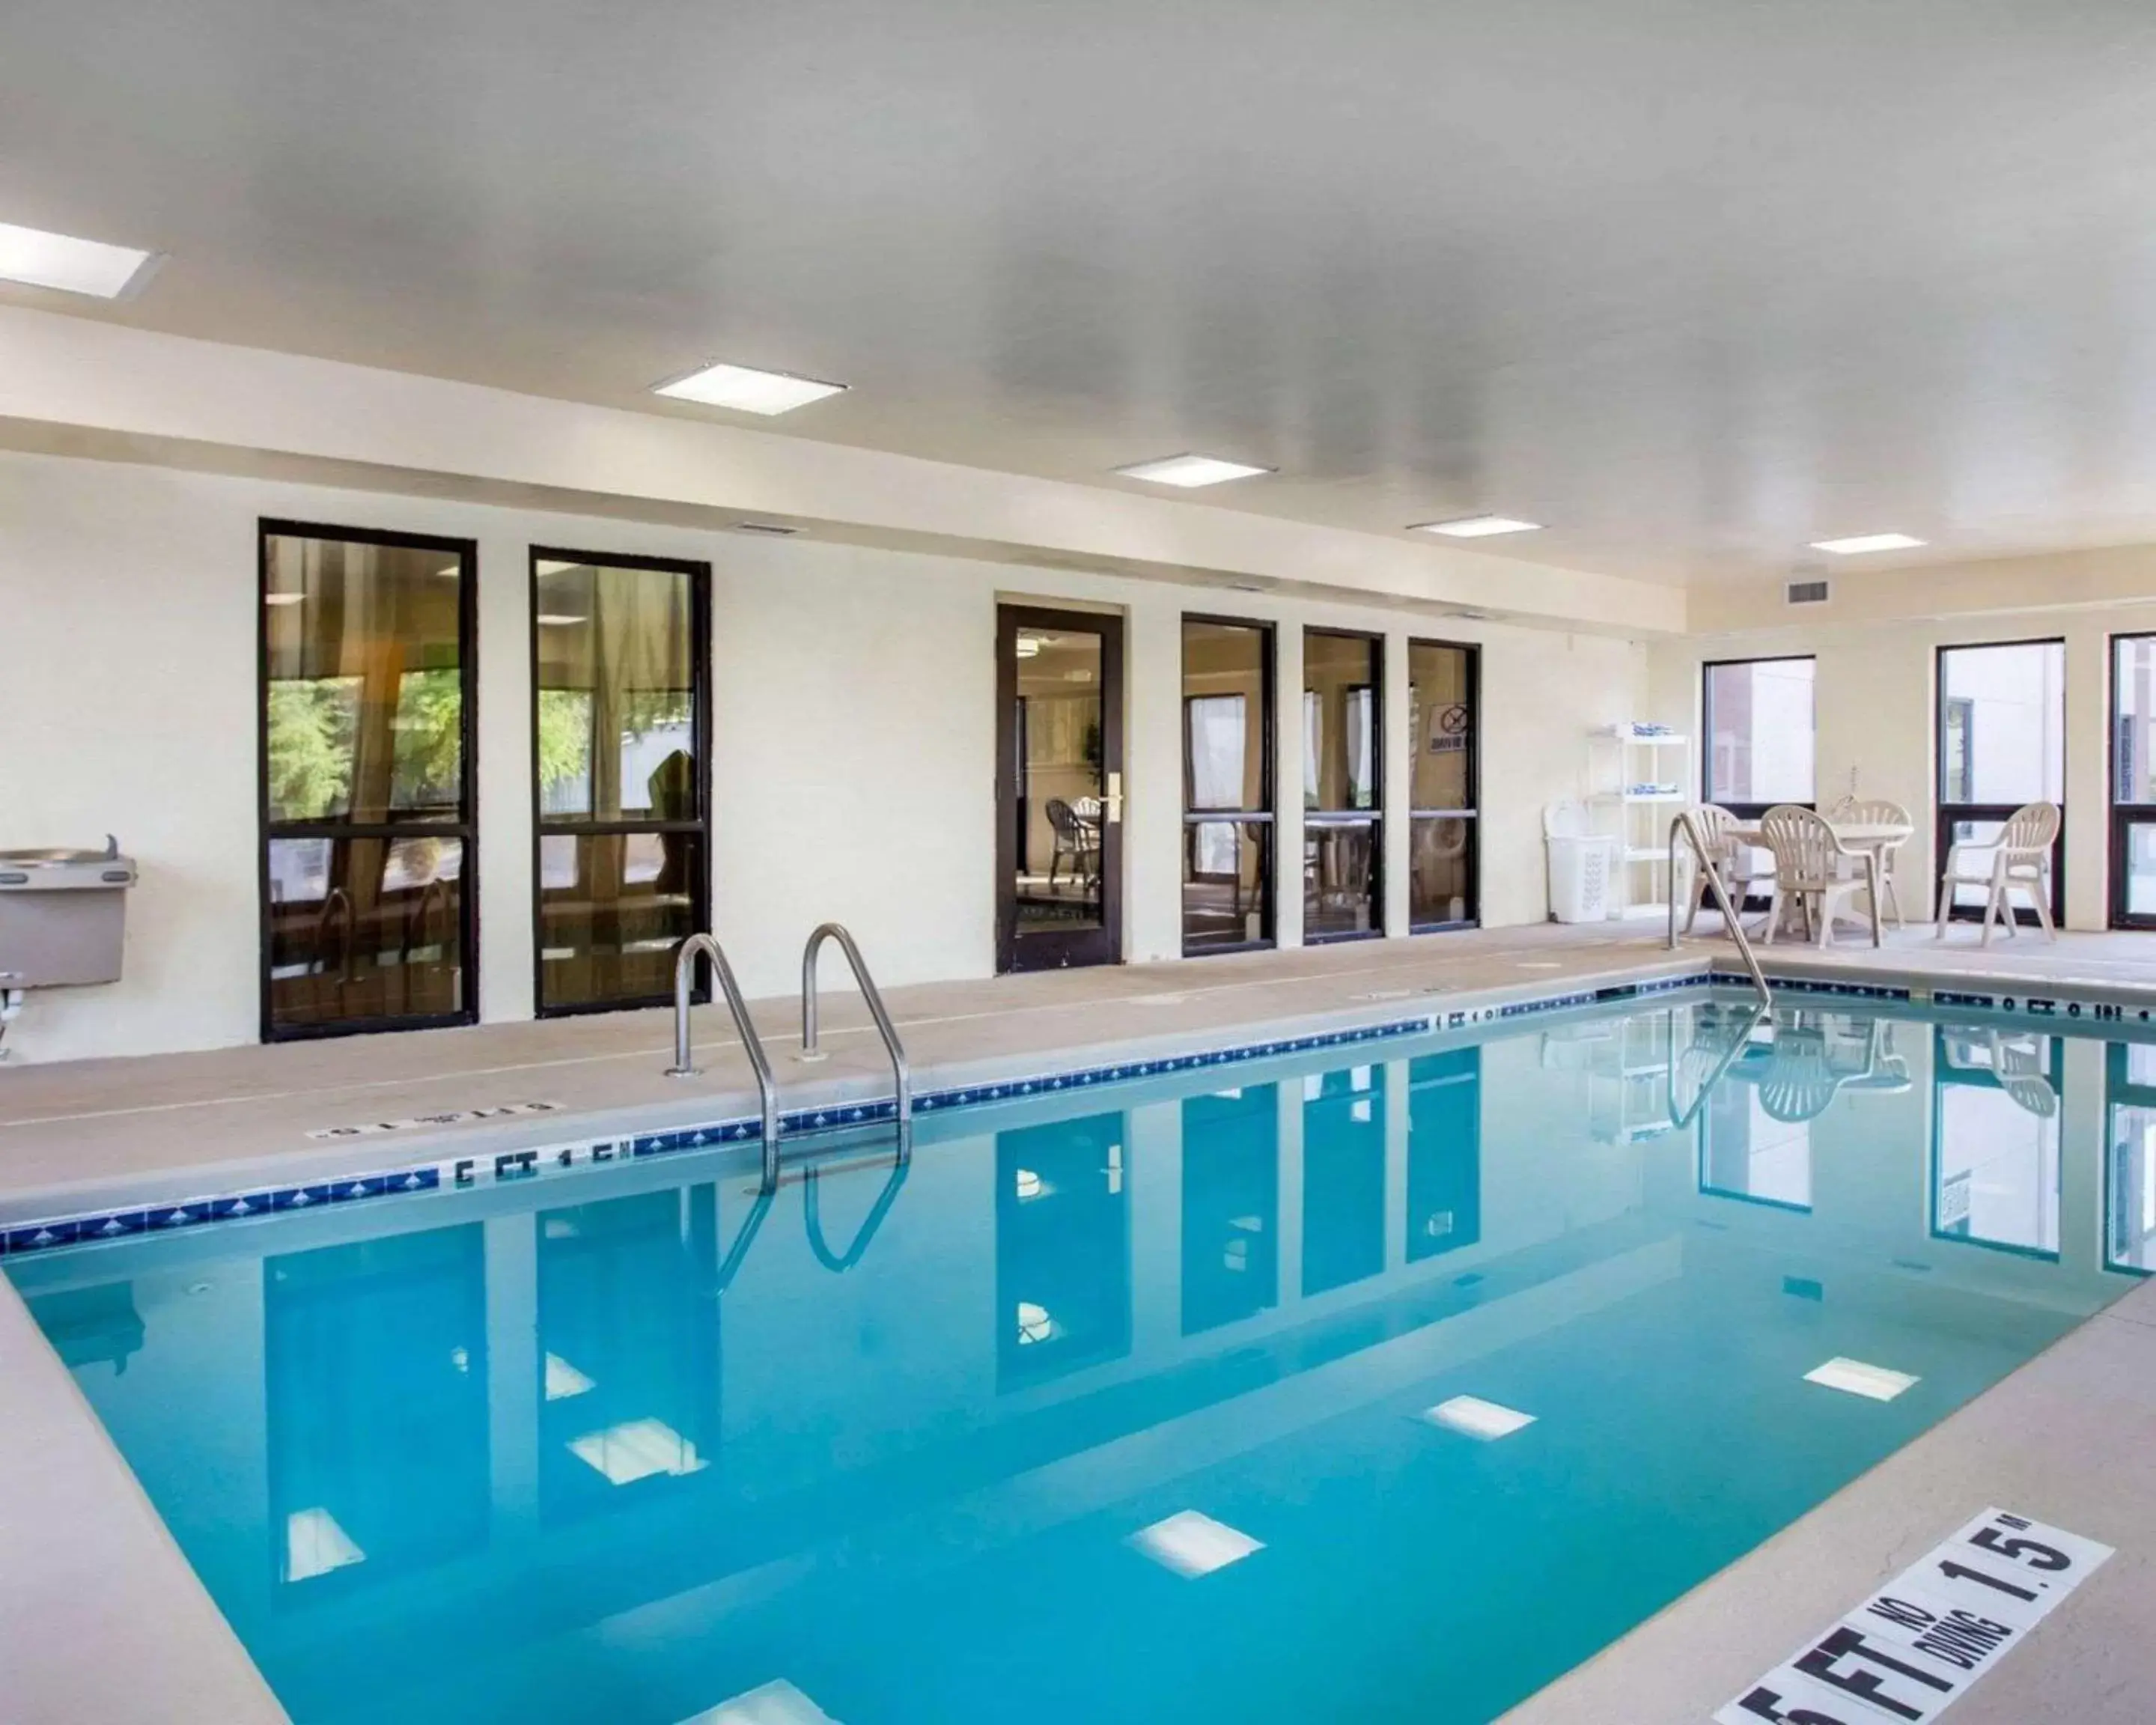 On site, Swimming Pool in Comfort Inn & Suites at Stone Mountain